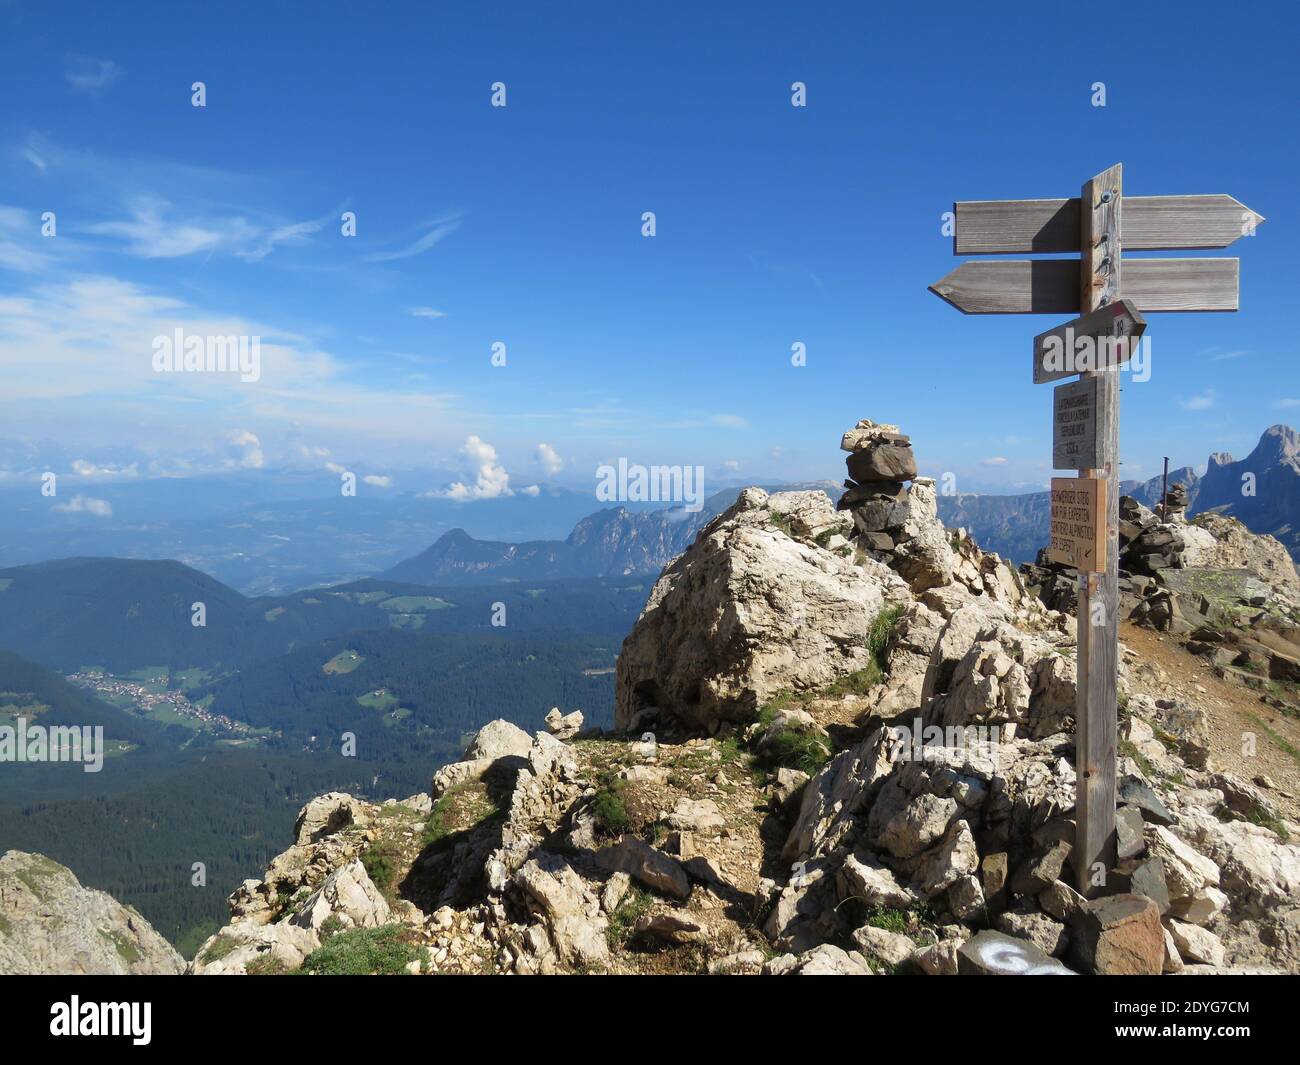 A closeup of road signs in mountains on the scenic mountainscape background,  hiking Dolomite Alps Stock Photo